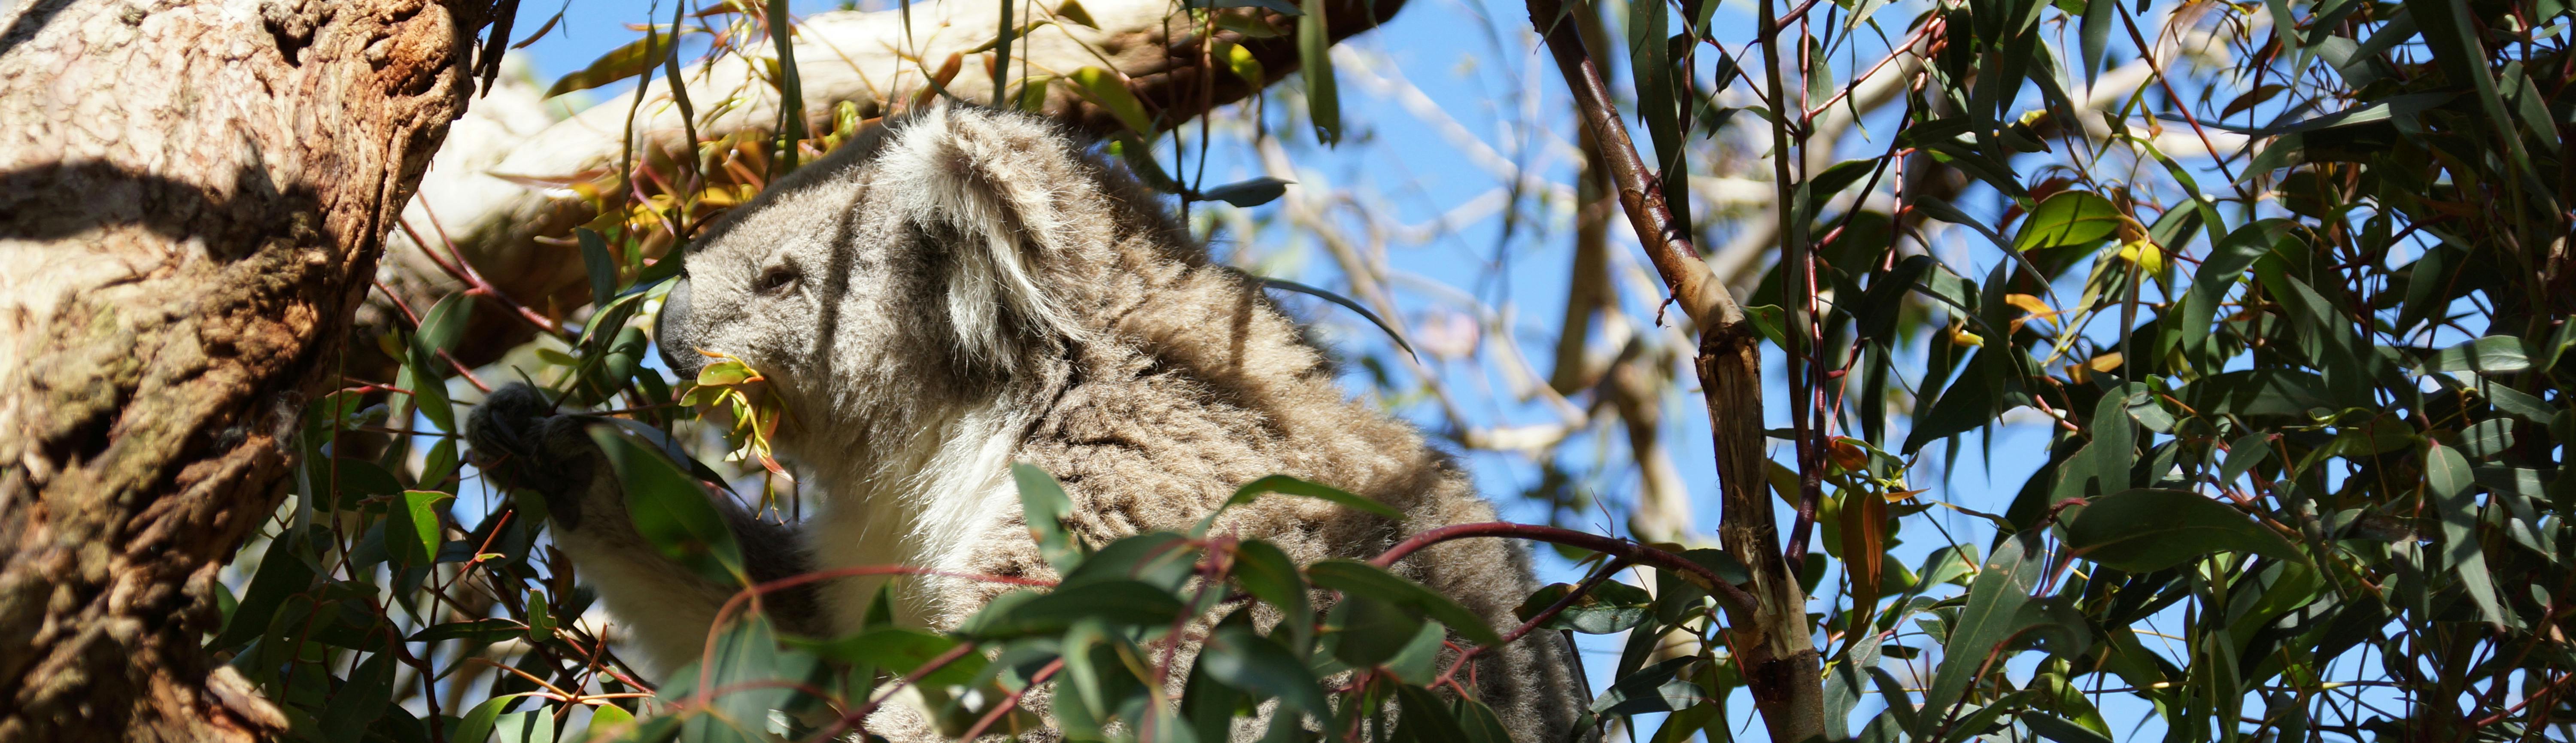 Hungry koala sitting in the middle of eucalyptus branches 